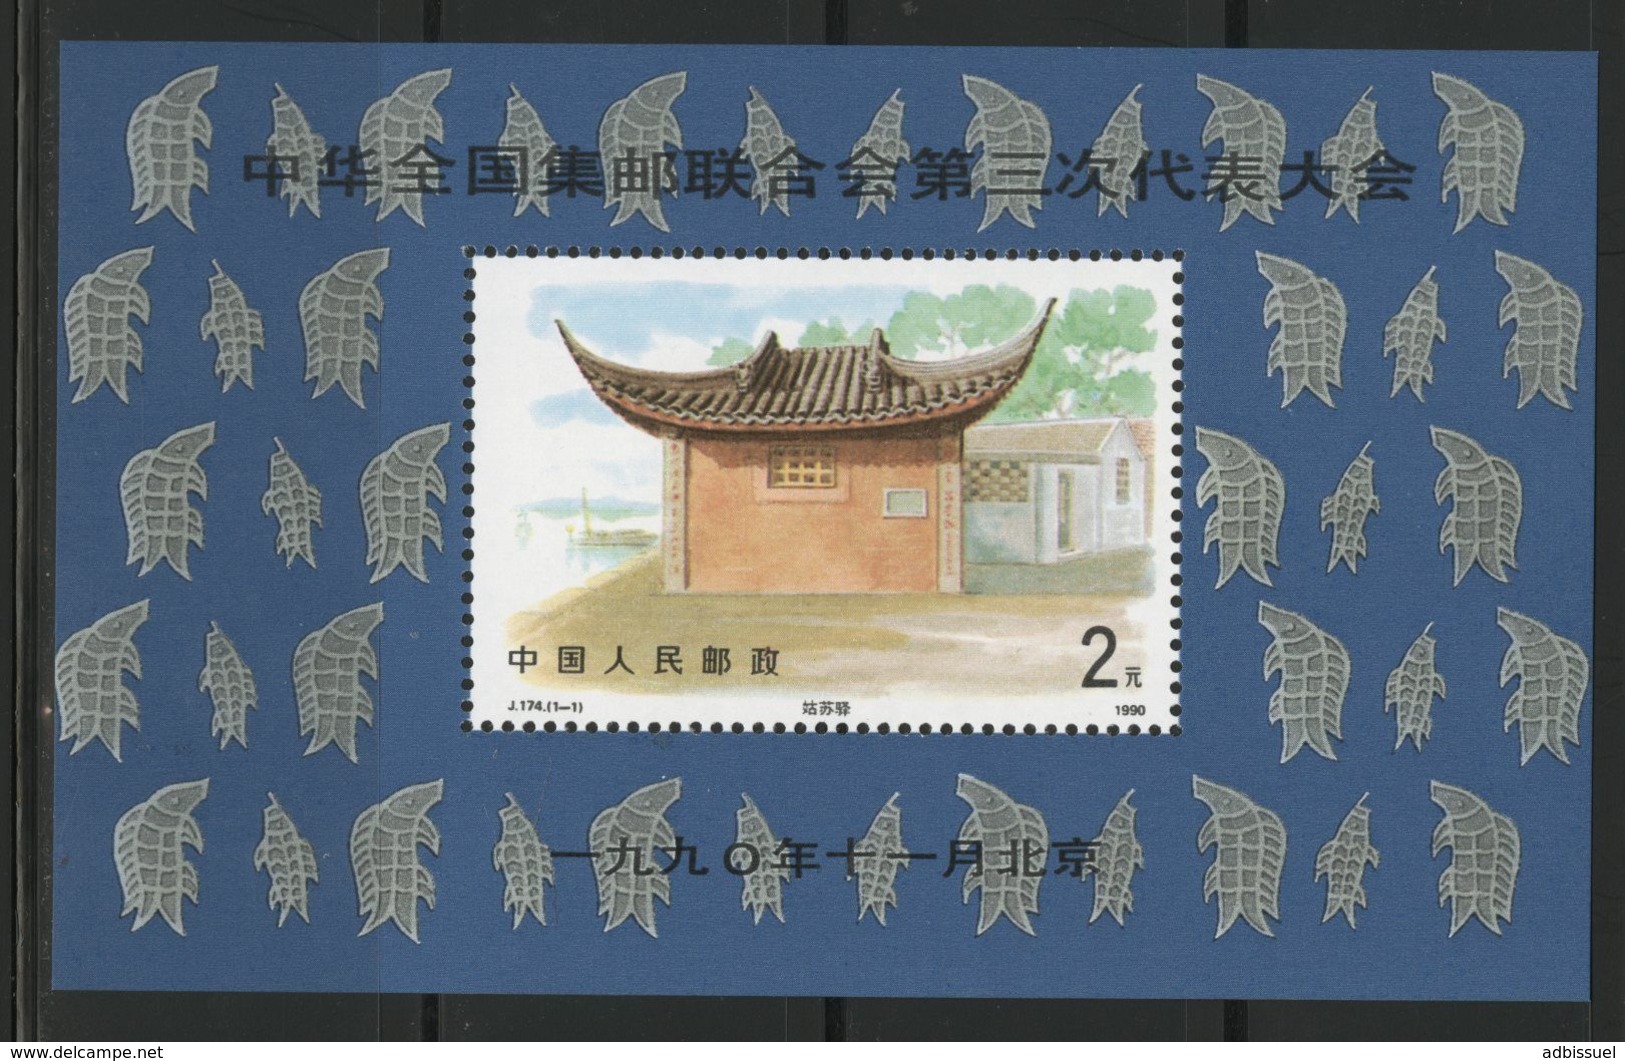 CHINA / CHINE 1990 Value 10 € BLOC FEUILLET Y&T N° 58 ** MNH. VG/TB. - Blocs-feuillets